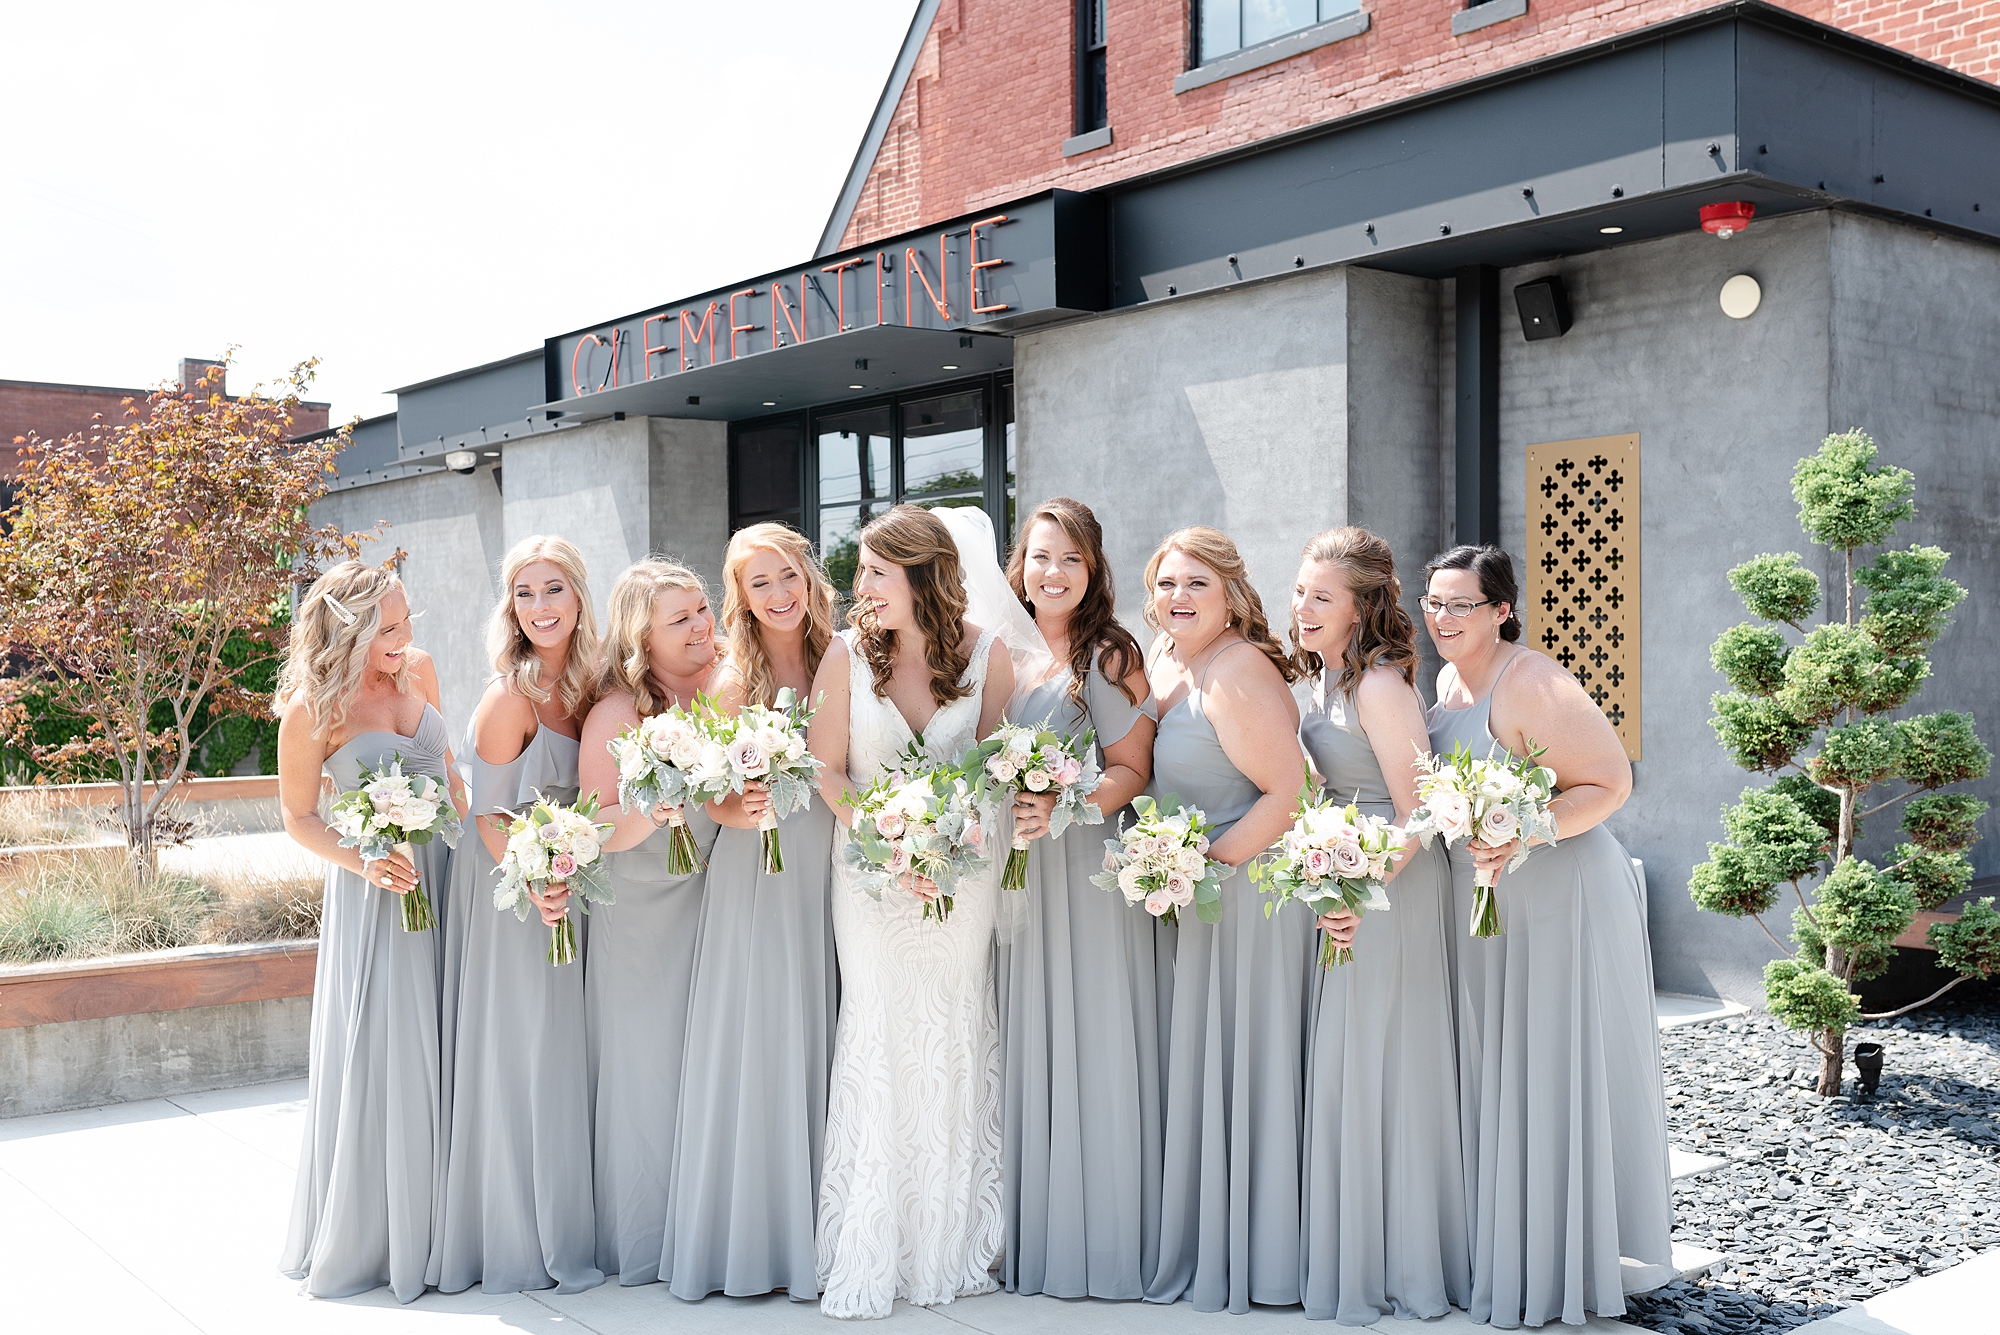 Bridal Party Group Shot At The Clementine in Nashville by Dolly deLong Photography